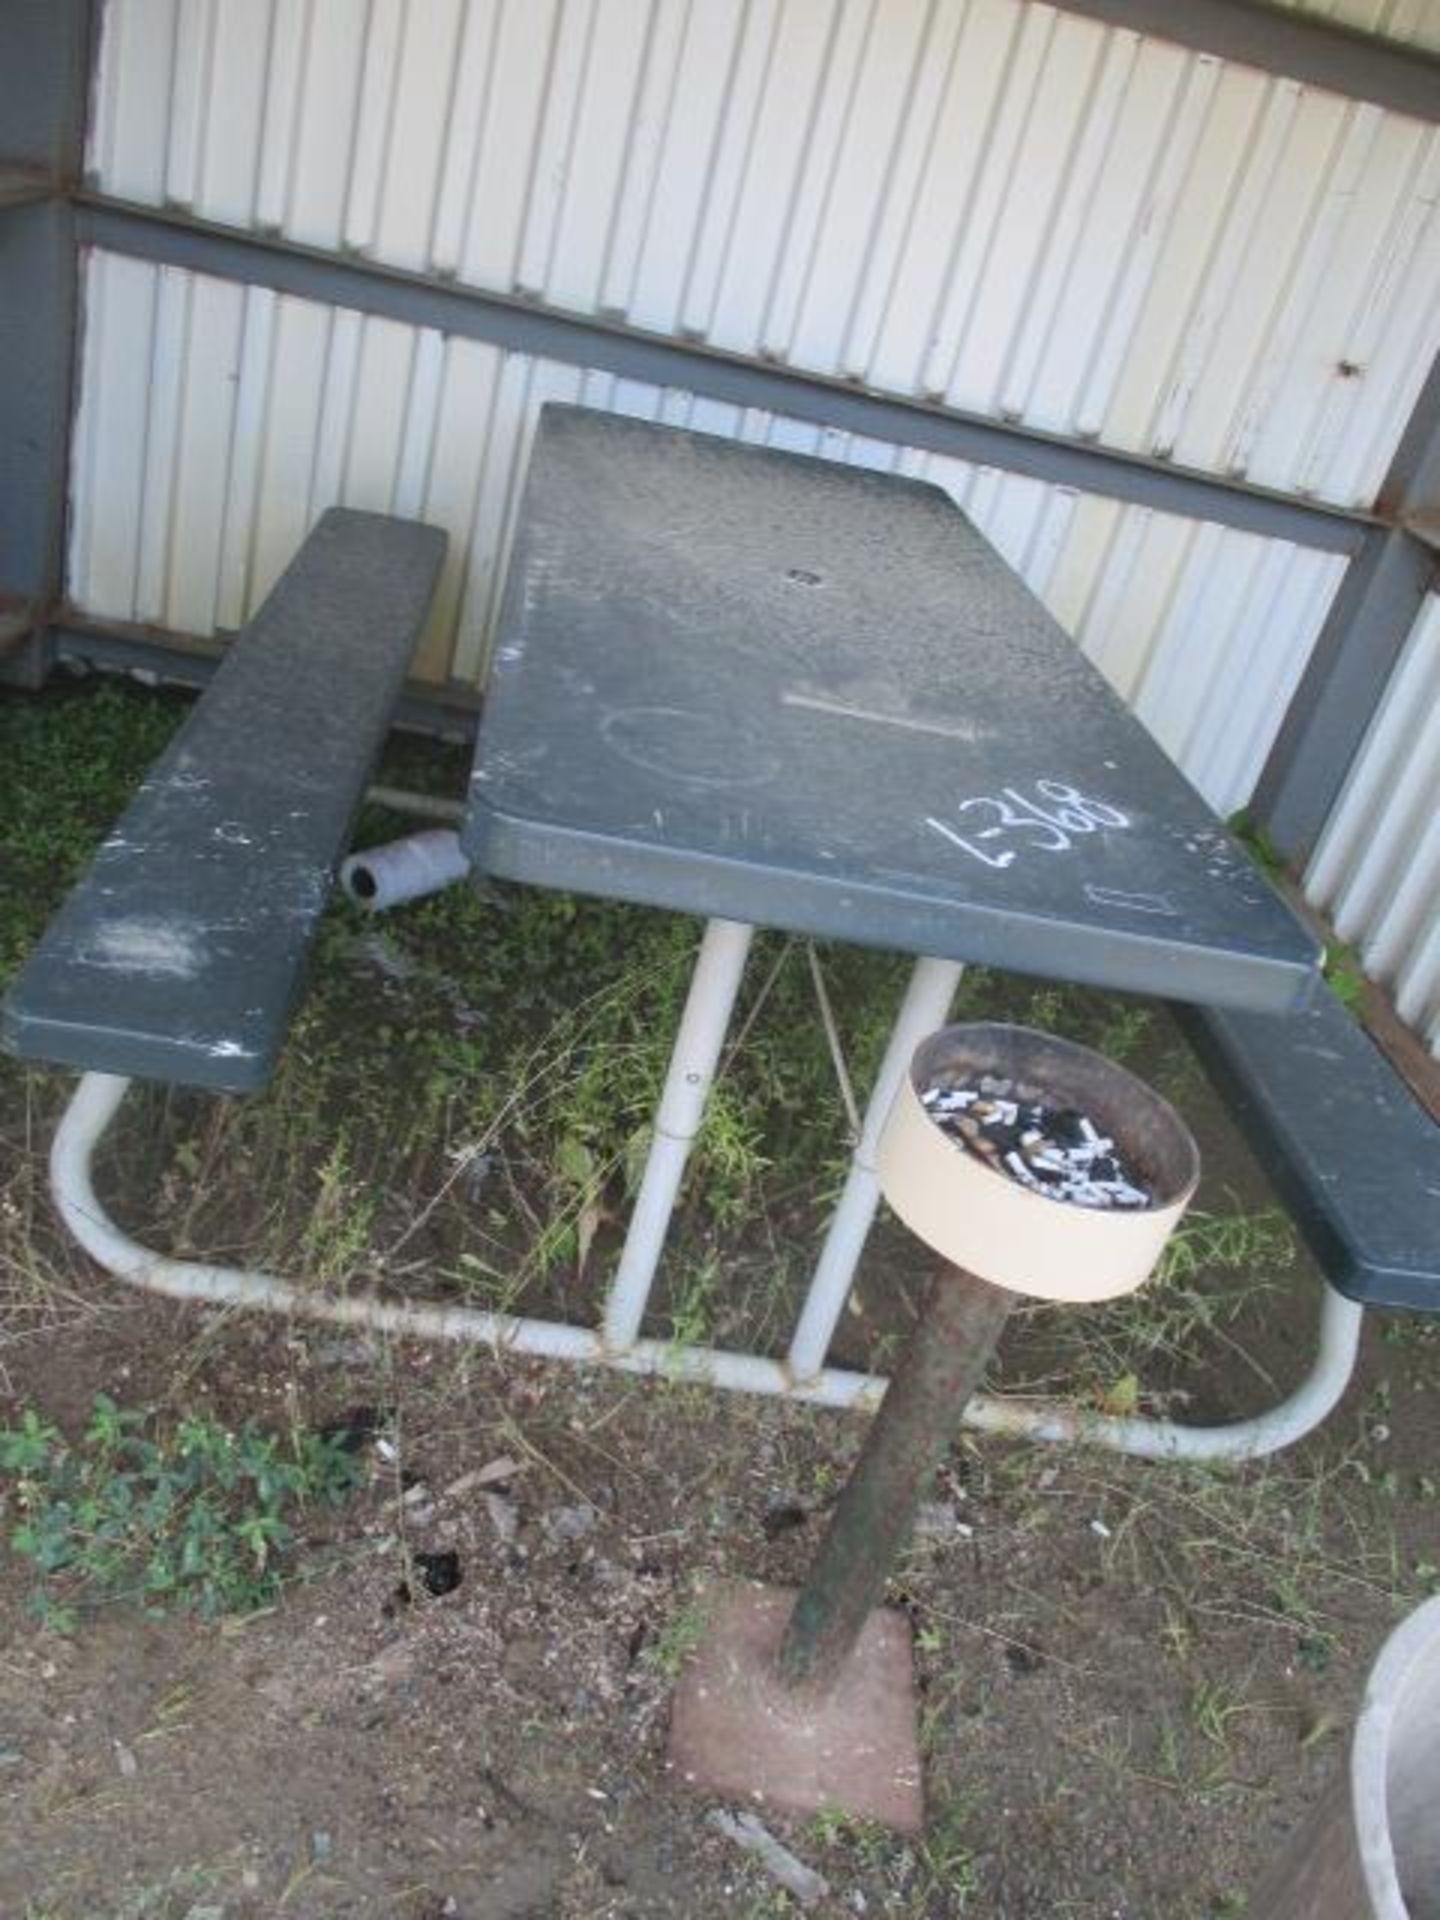 Picnic Table - Plastic and Metal Frame and Butt Can